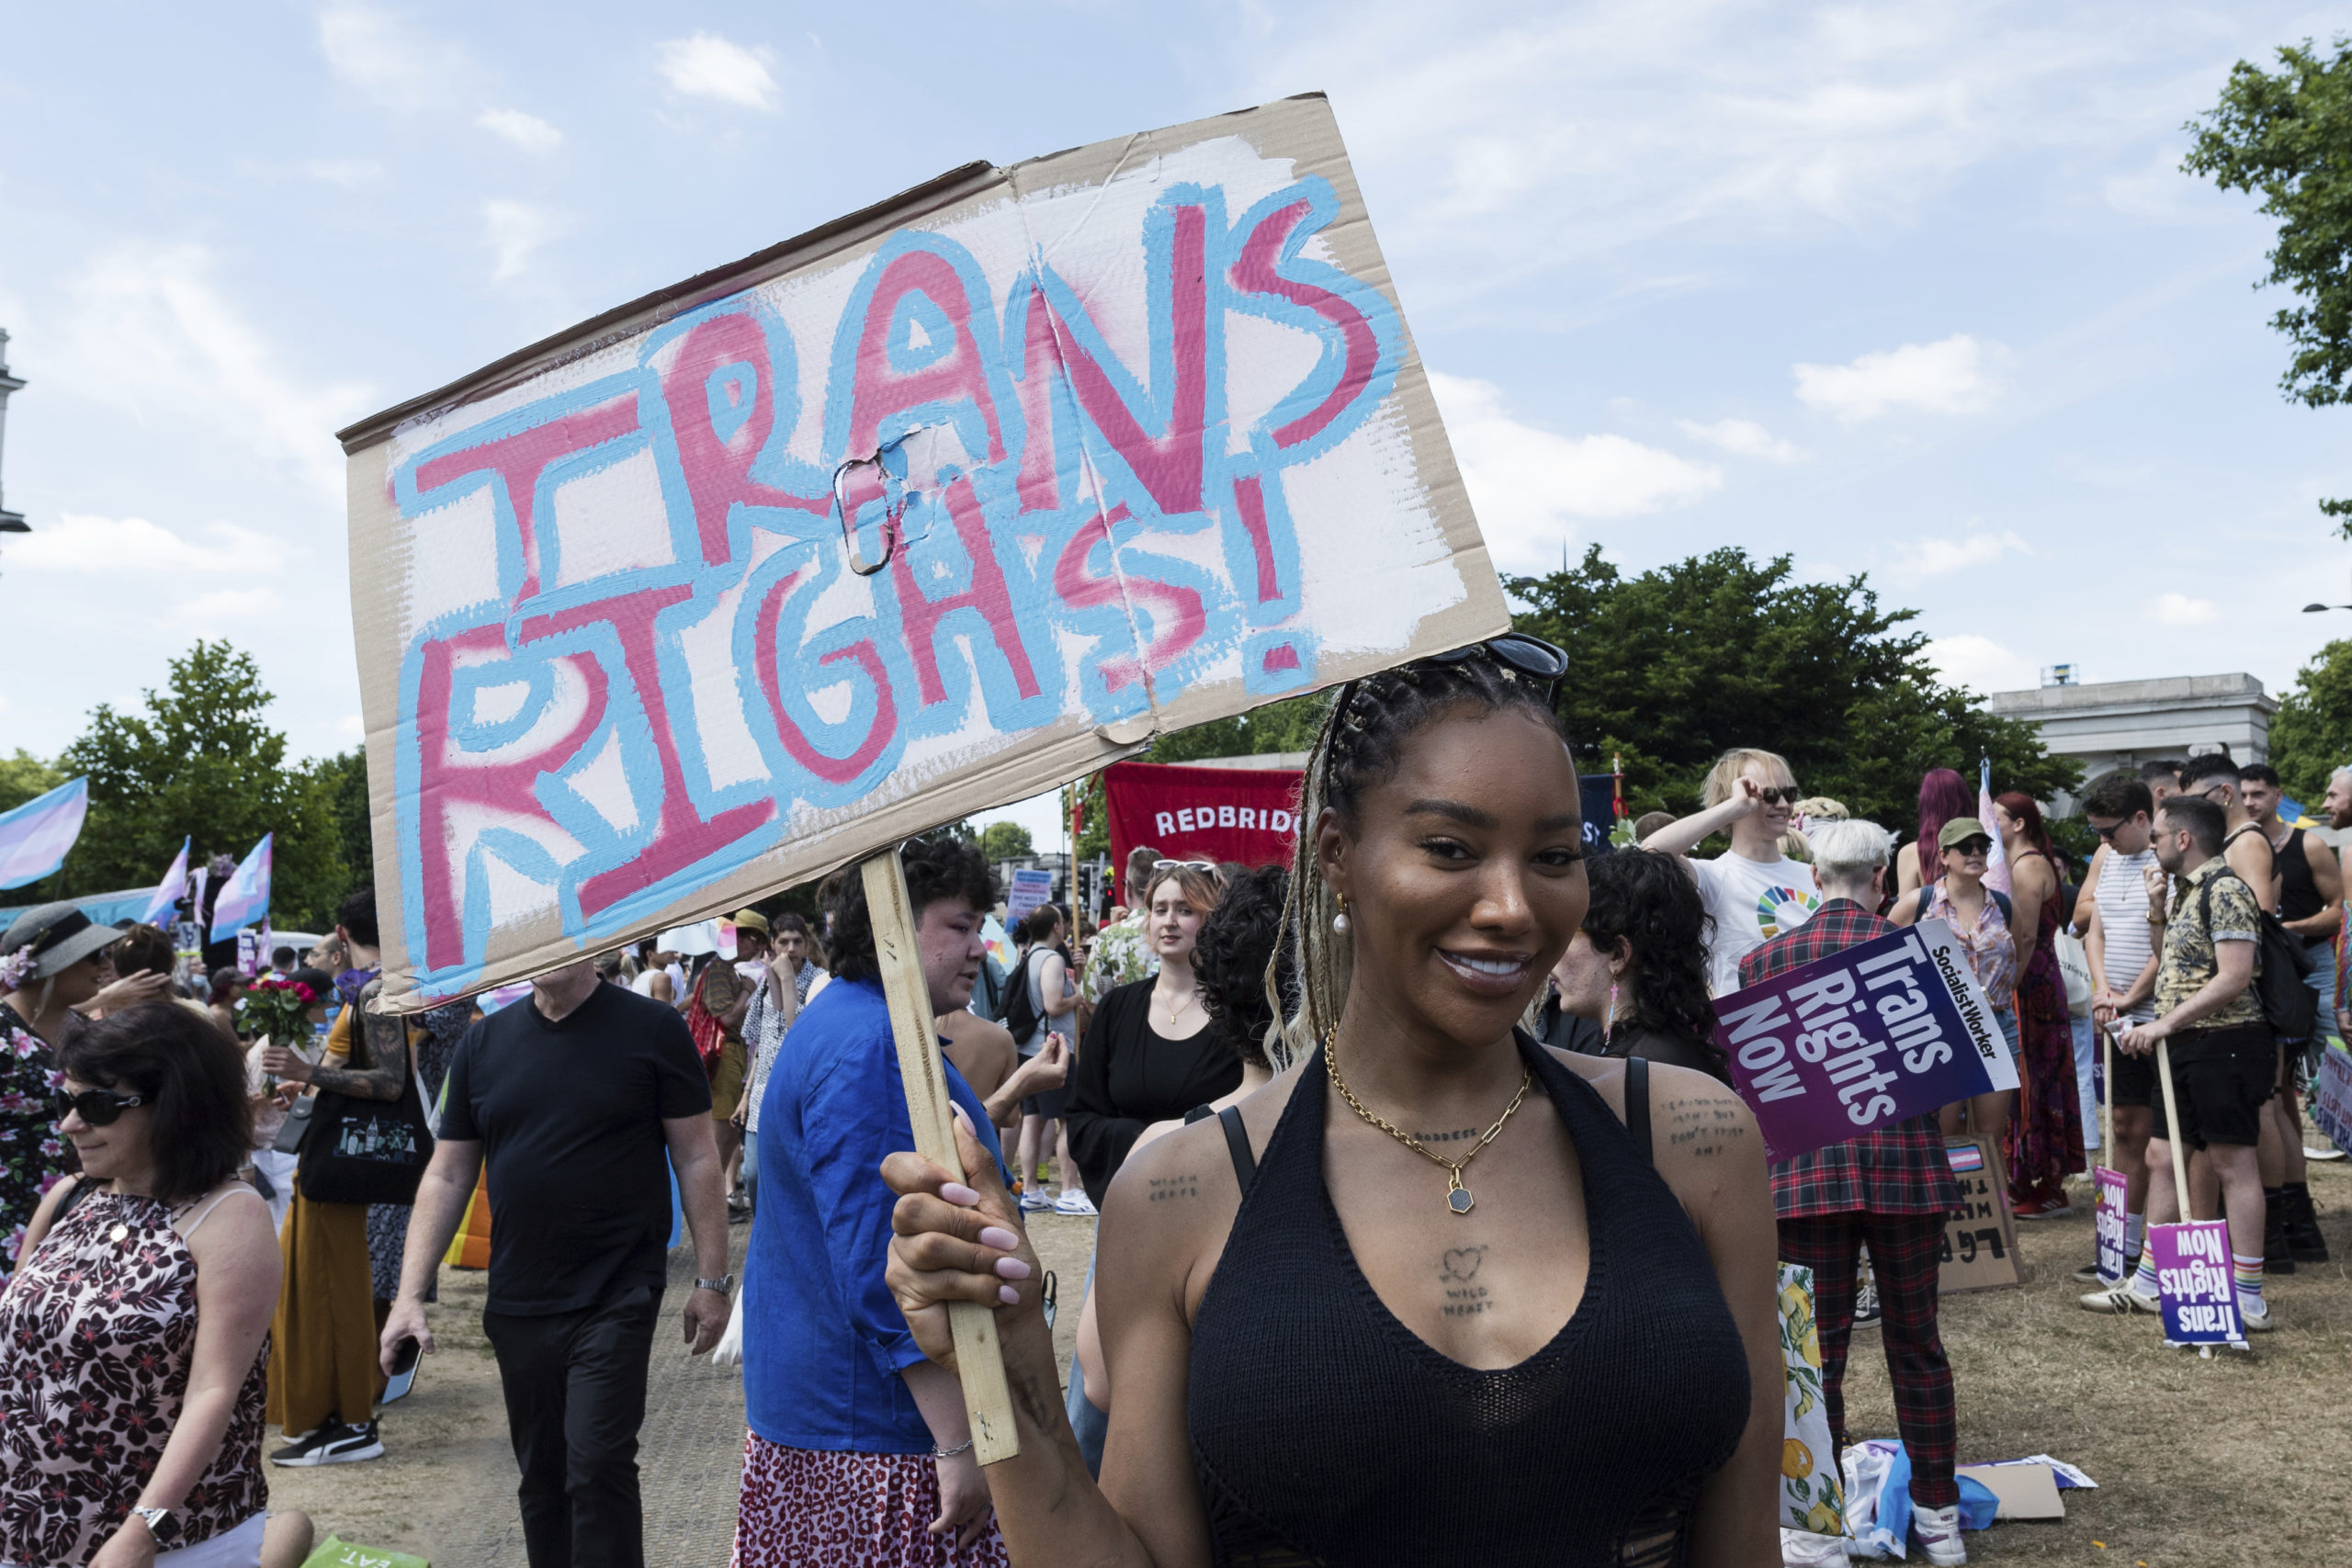 A Black woman smiles as she holds up a colorful "Trans Rights" sign at a Pride event in London.